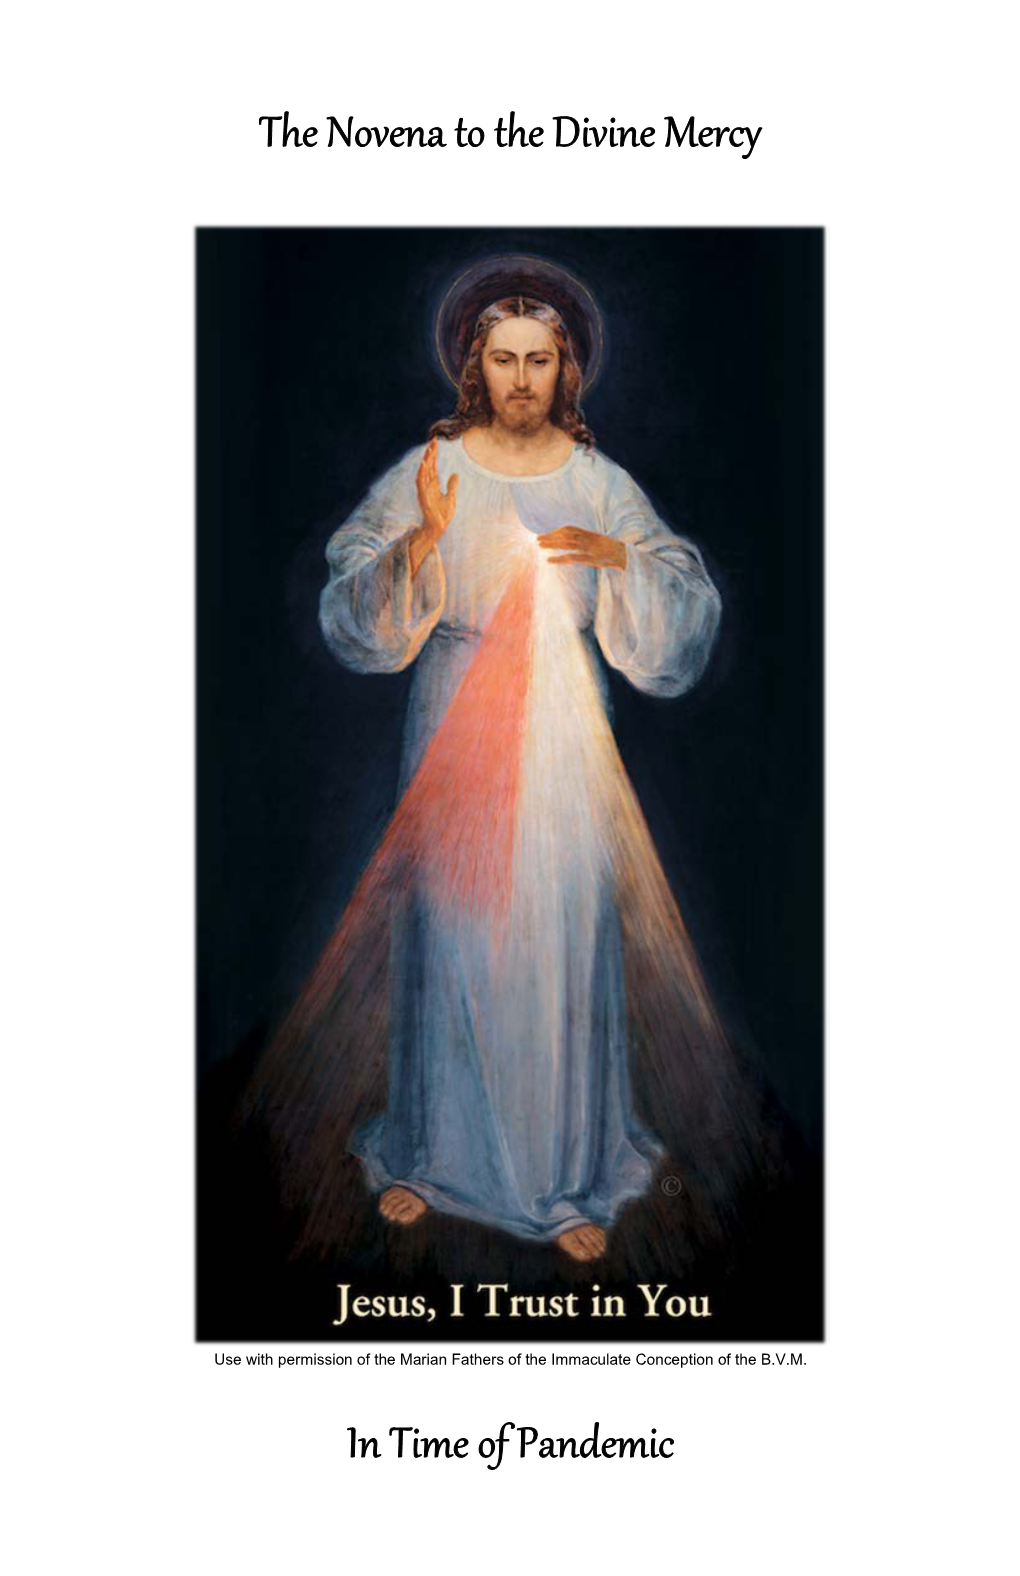 The Novena to the Divine Mercy in Time of Pandemic Booklet